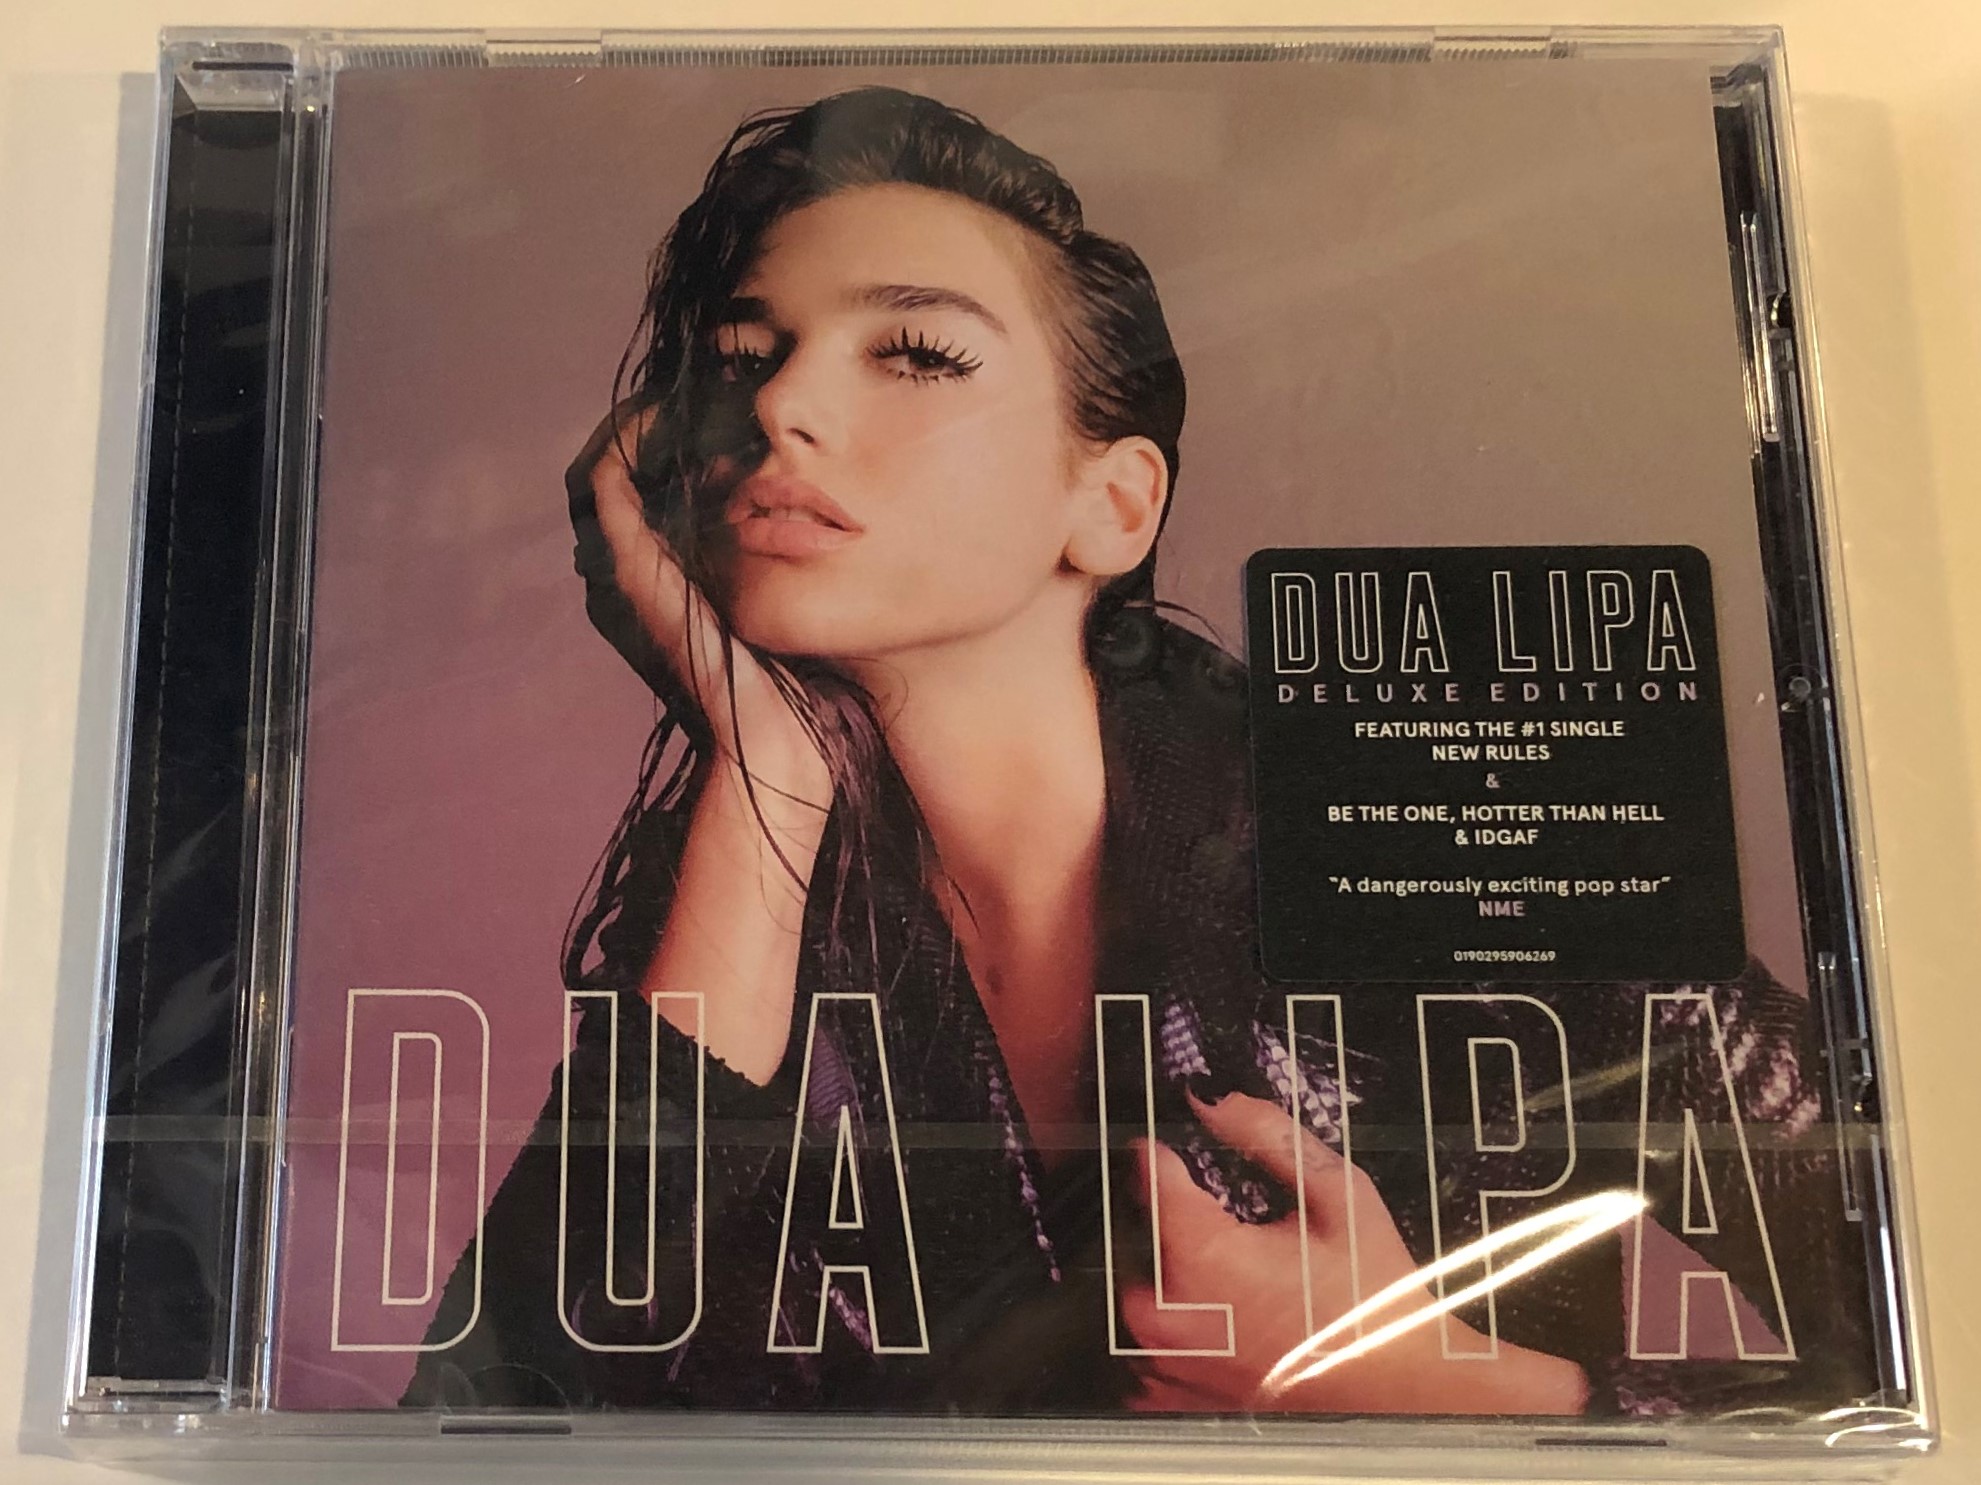 dua-lipa-deluxe-edition-featuring-the-1-single-new-rules-be-the-one-hotter-than-hell-idgaf-a-dangerously-exciting-pop-star-nme-warner-bros.-records-audio-cd-2017-0190295906269-1-.jpg